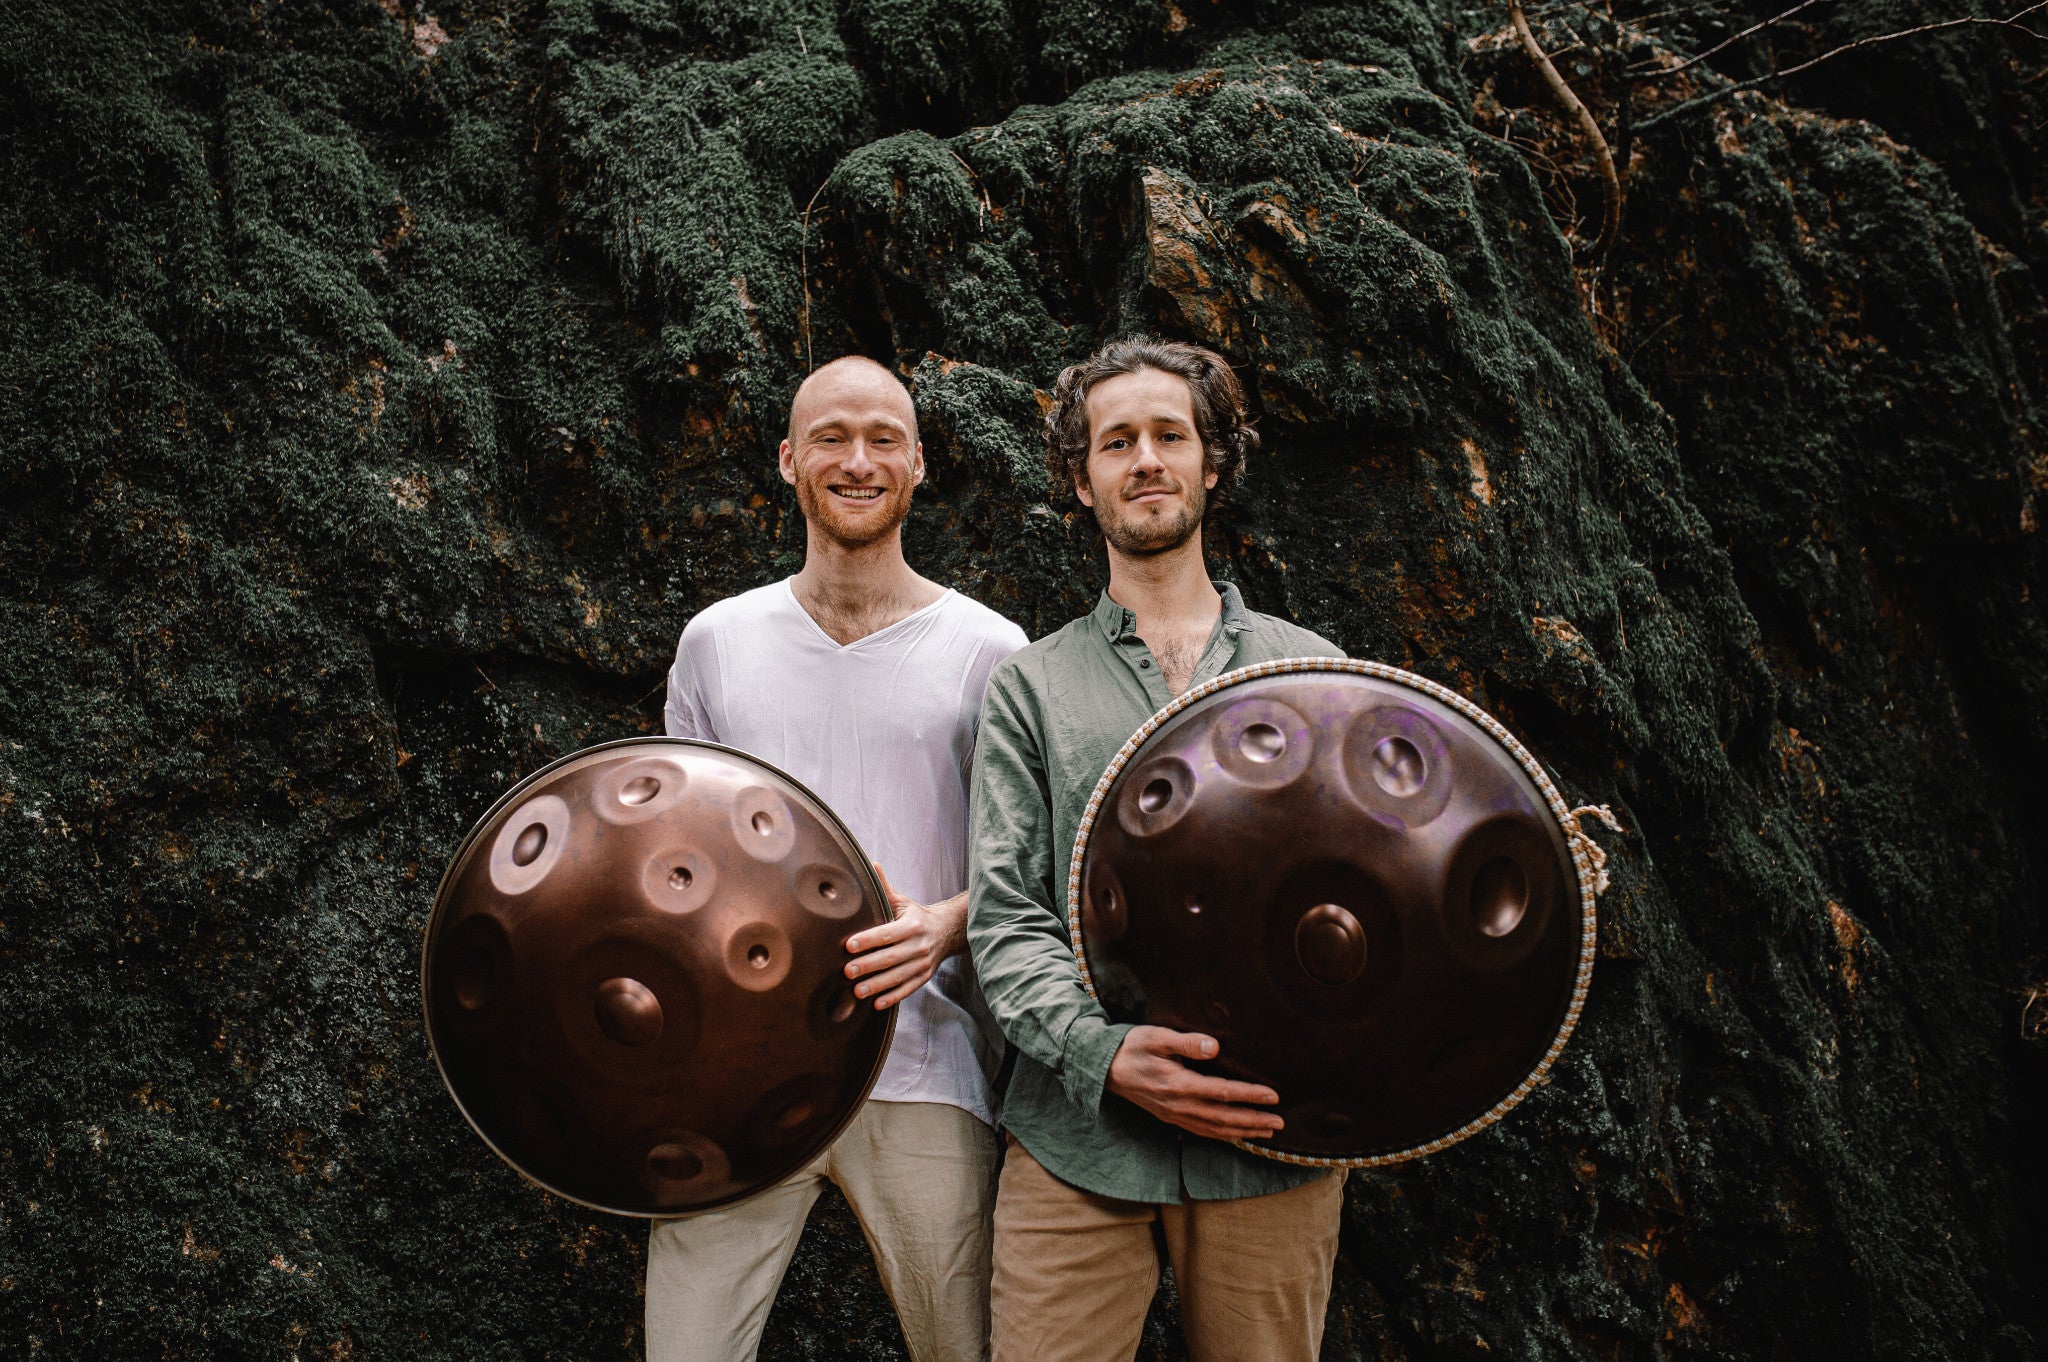 Handpan Photos and Images